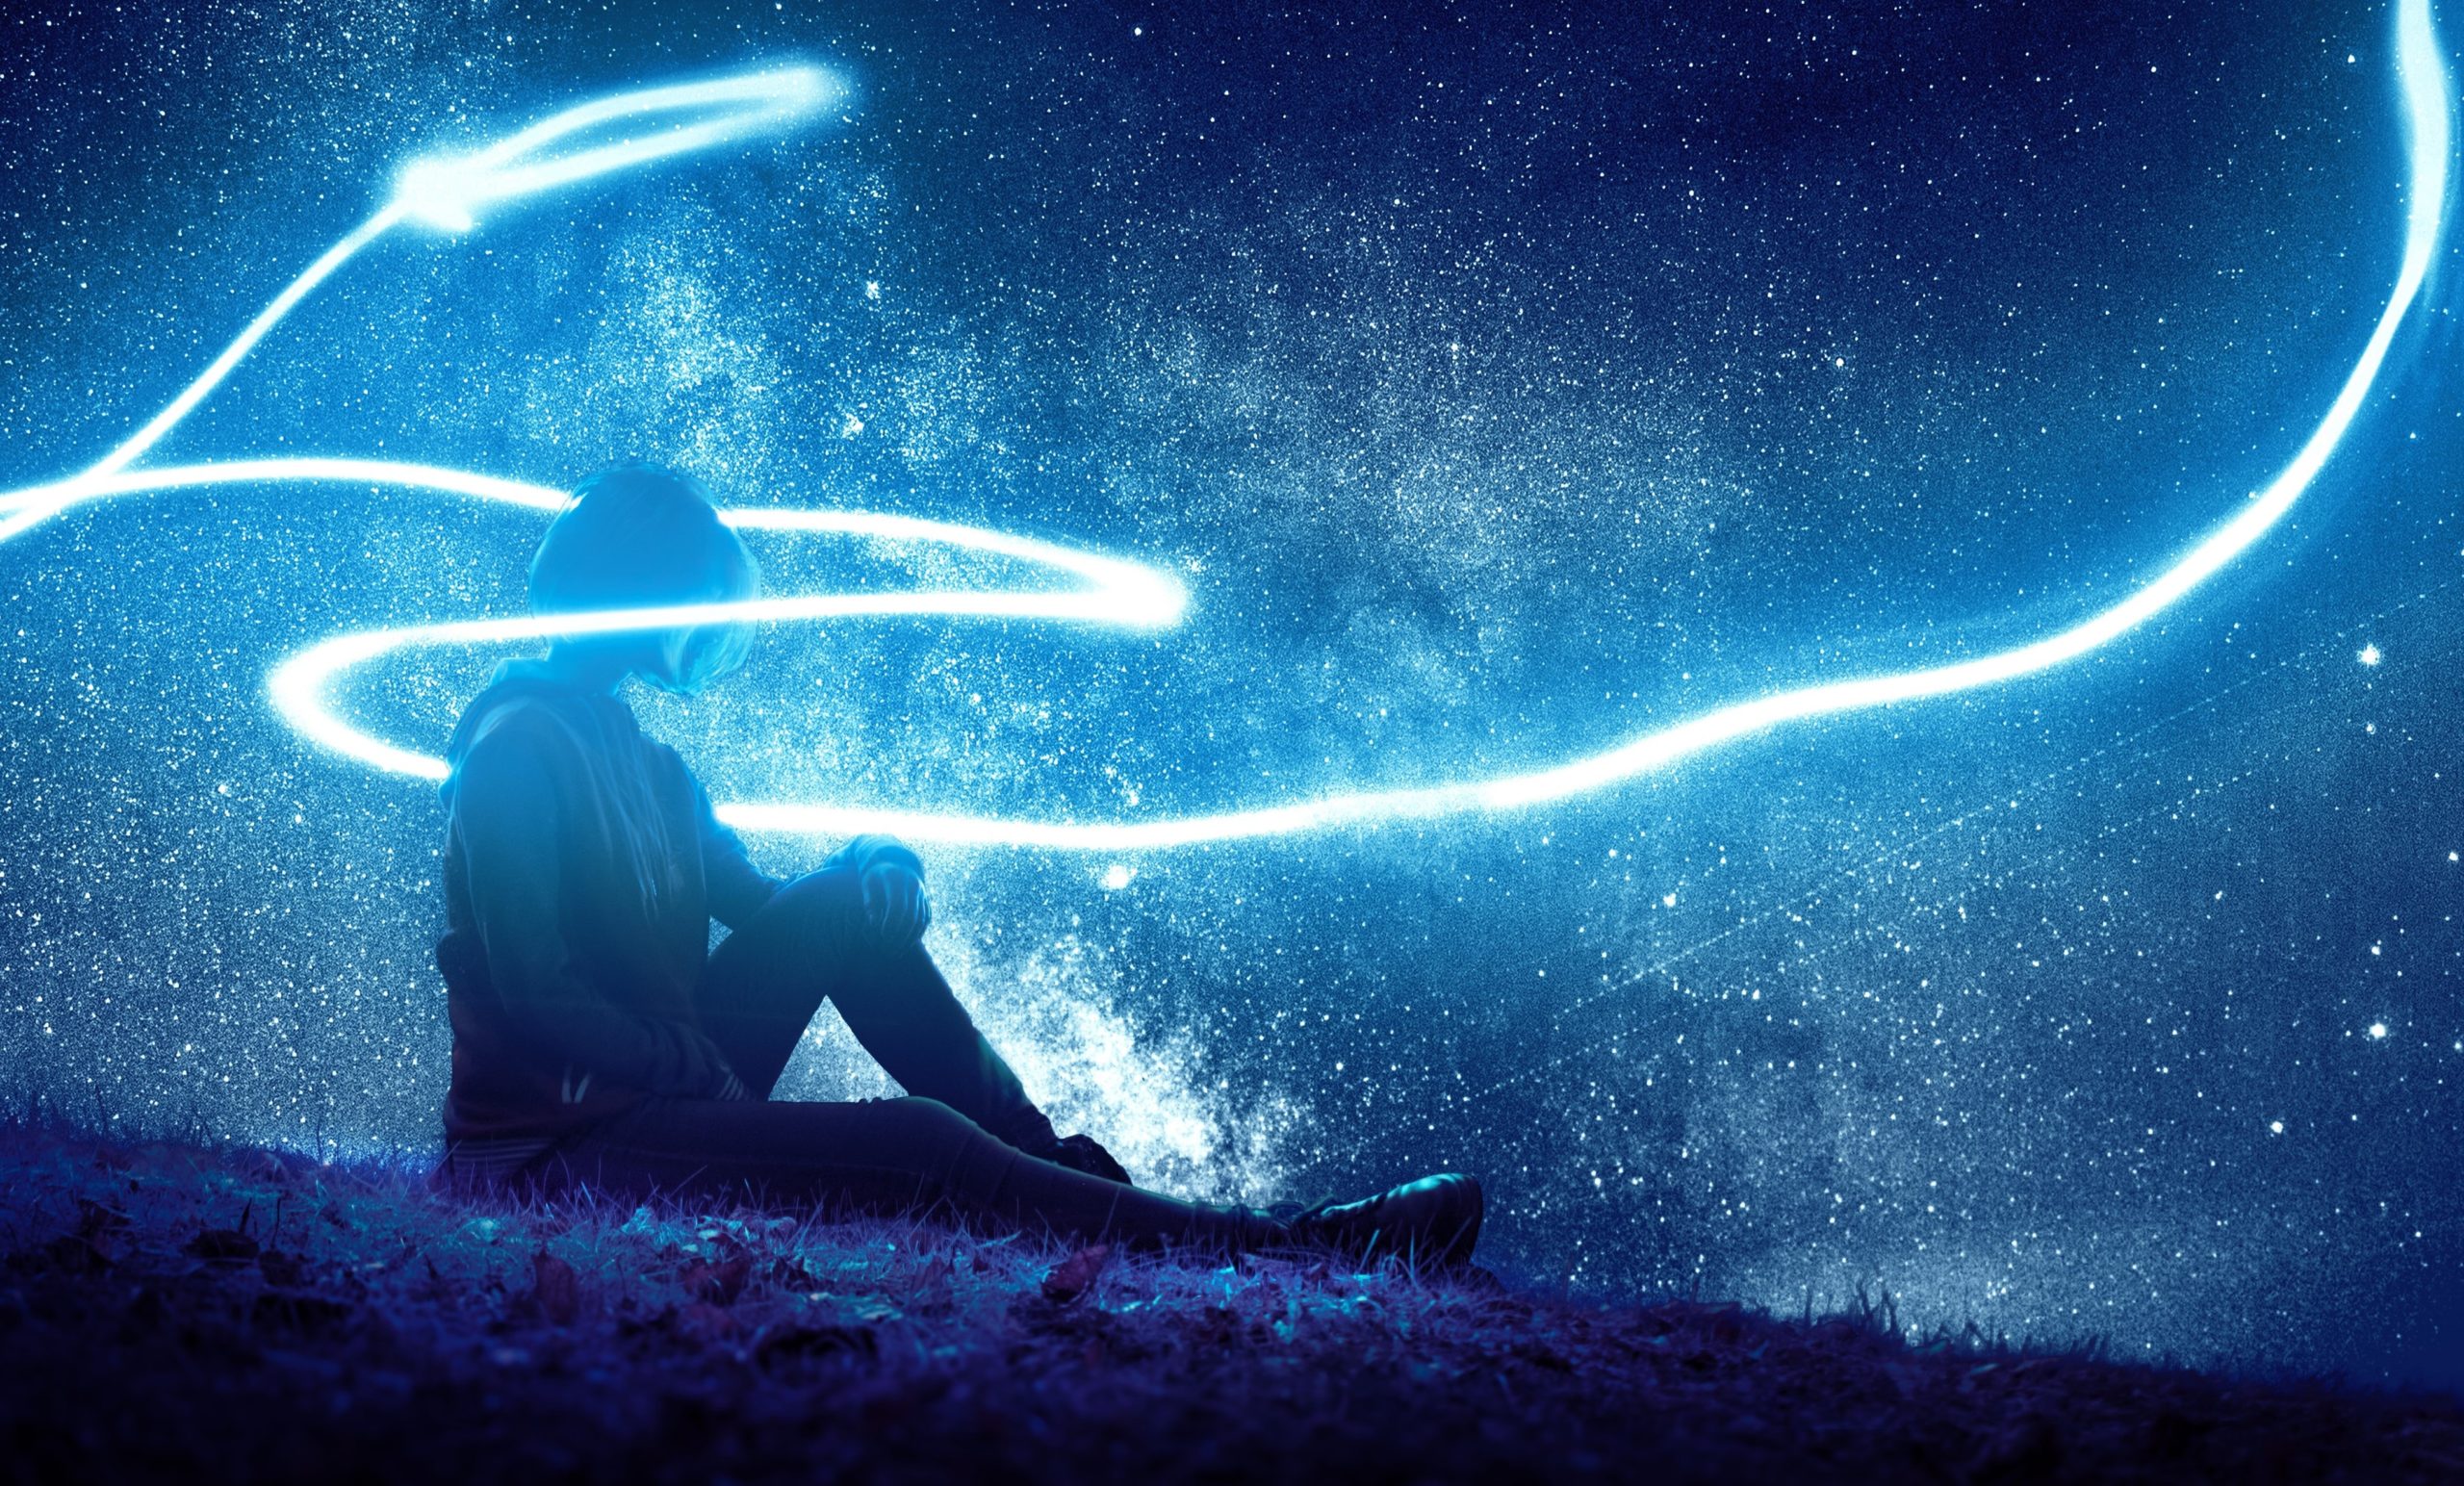 A woman seated on a hill, a blue light swirling around her.